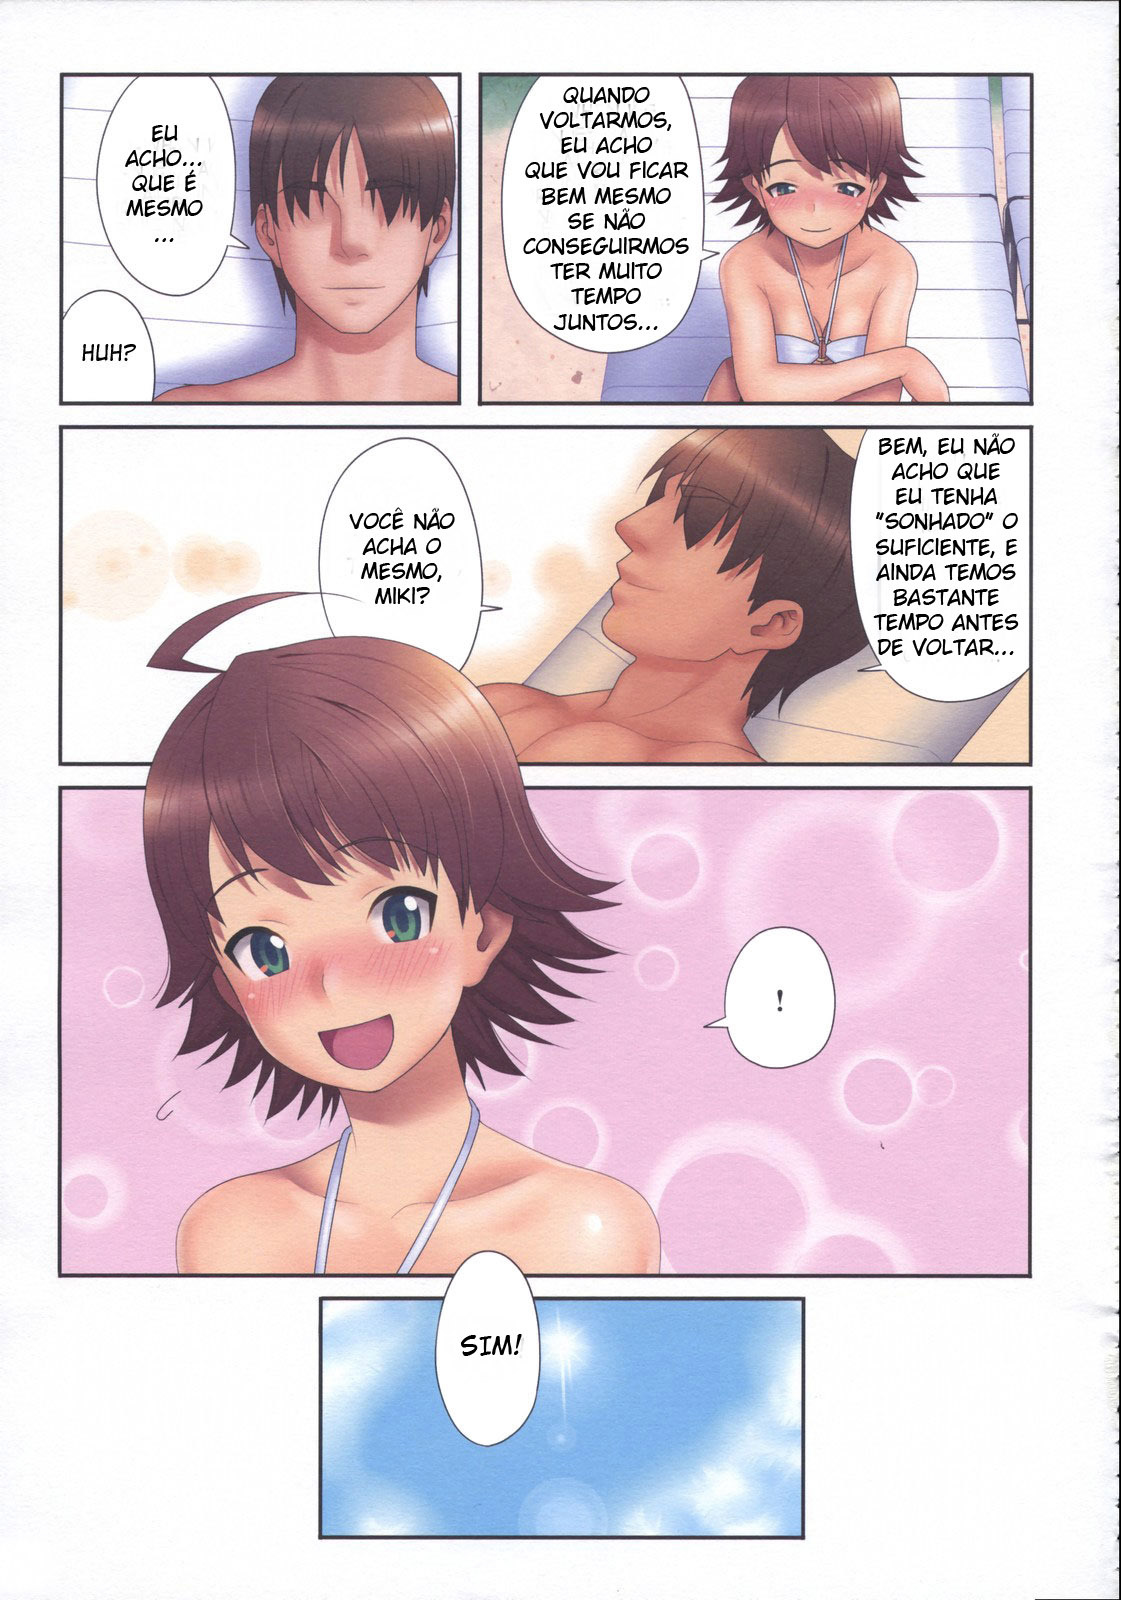 (CT12) [TNC. (Lunch)] Fourteen Plus (THE iDOLM@STER) [Portuguese-BR] {Mountblank} page 19 full